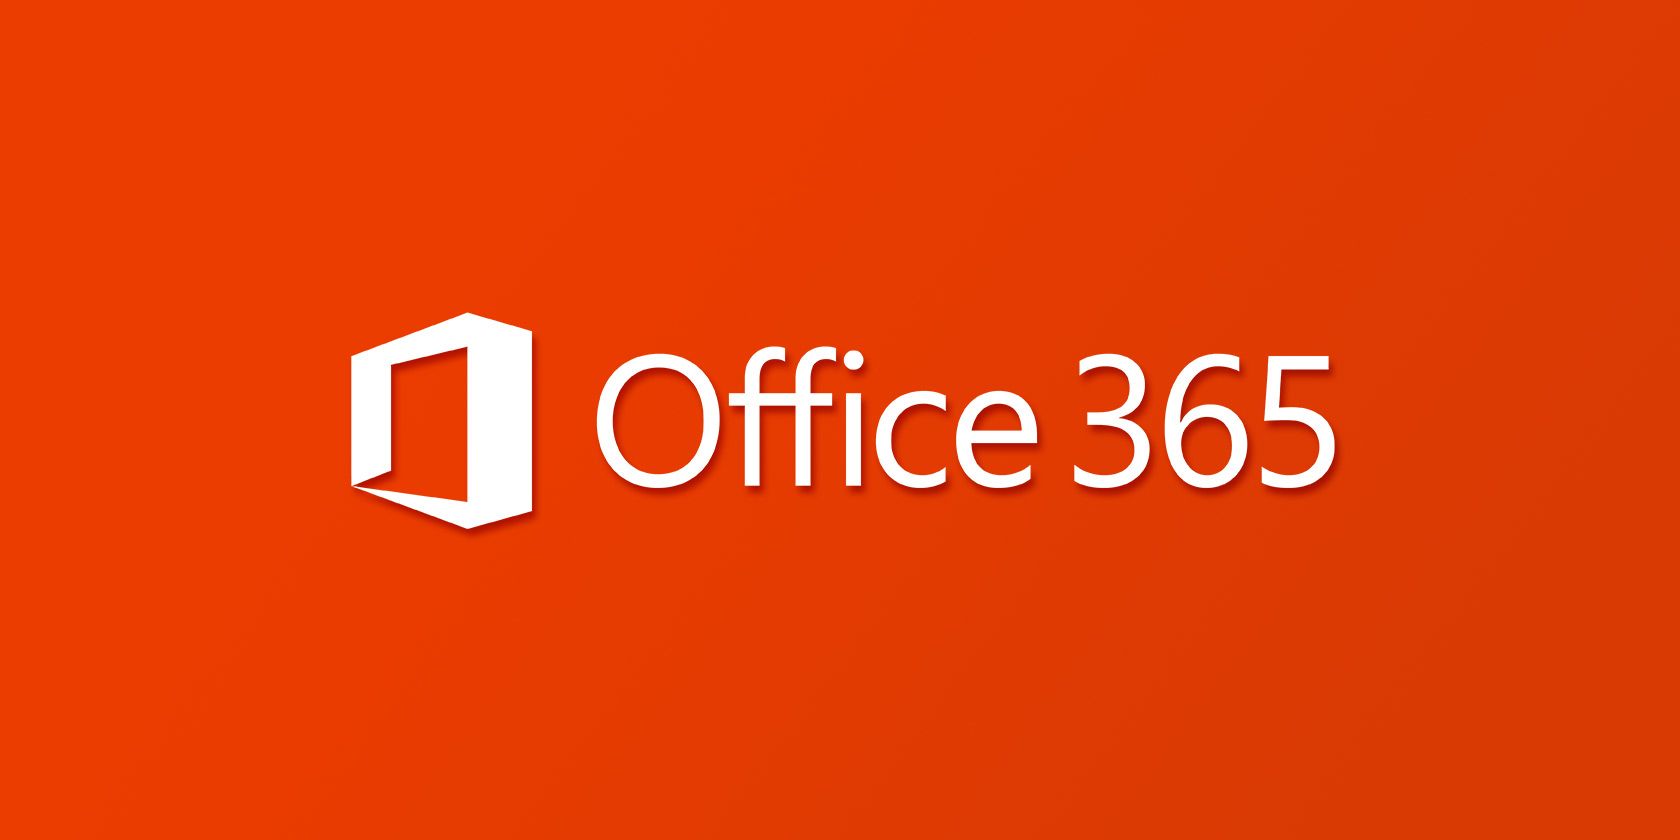 How to Cancel an Office 365 Subscription and Get a Refund